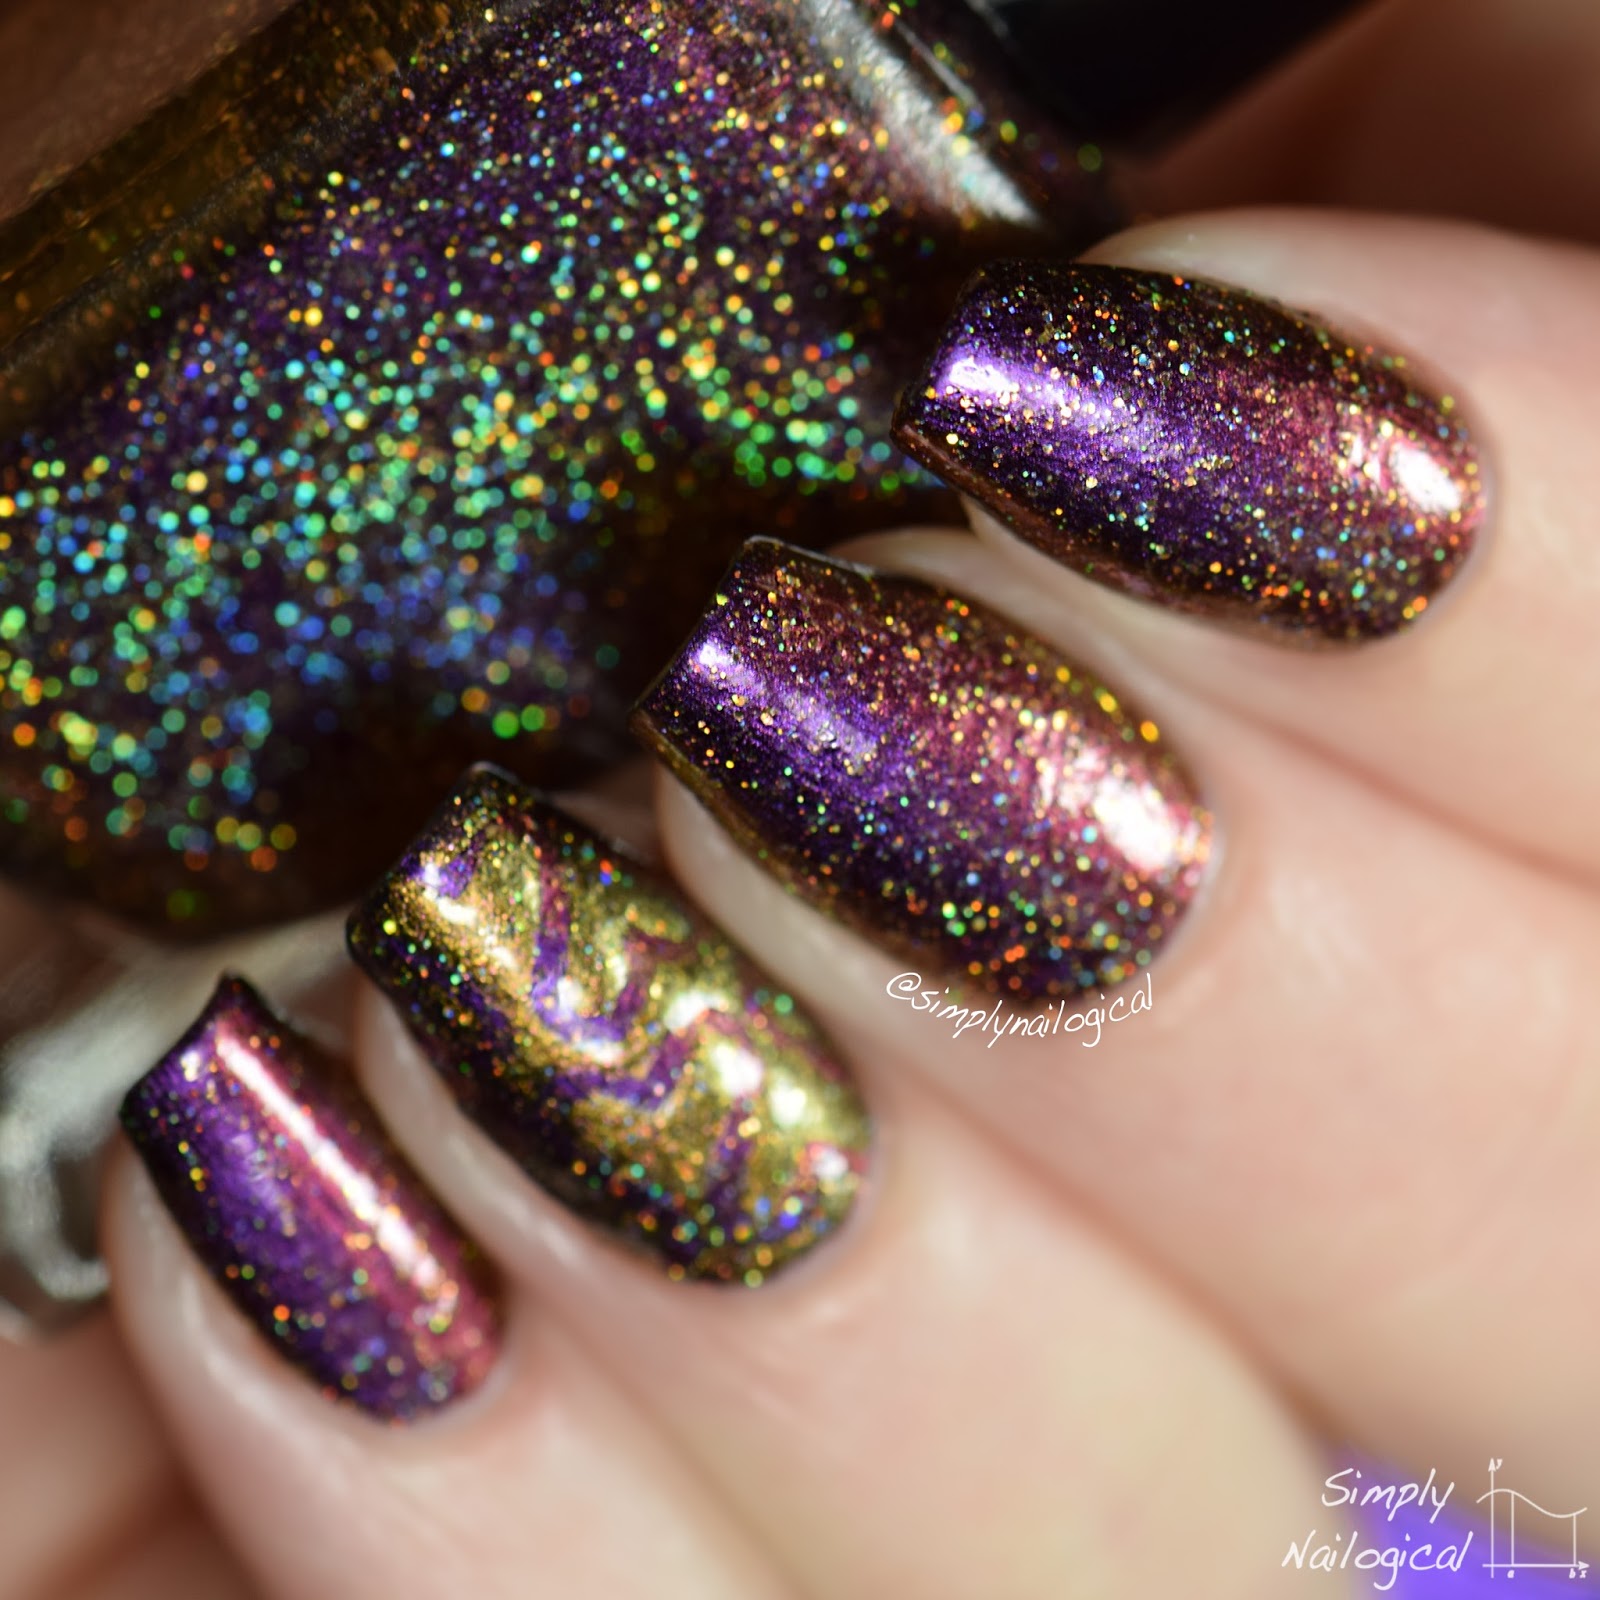 FUN Lacquer 2015 Love collection - Storge (H)